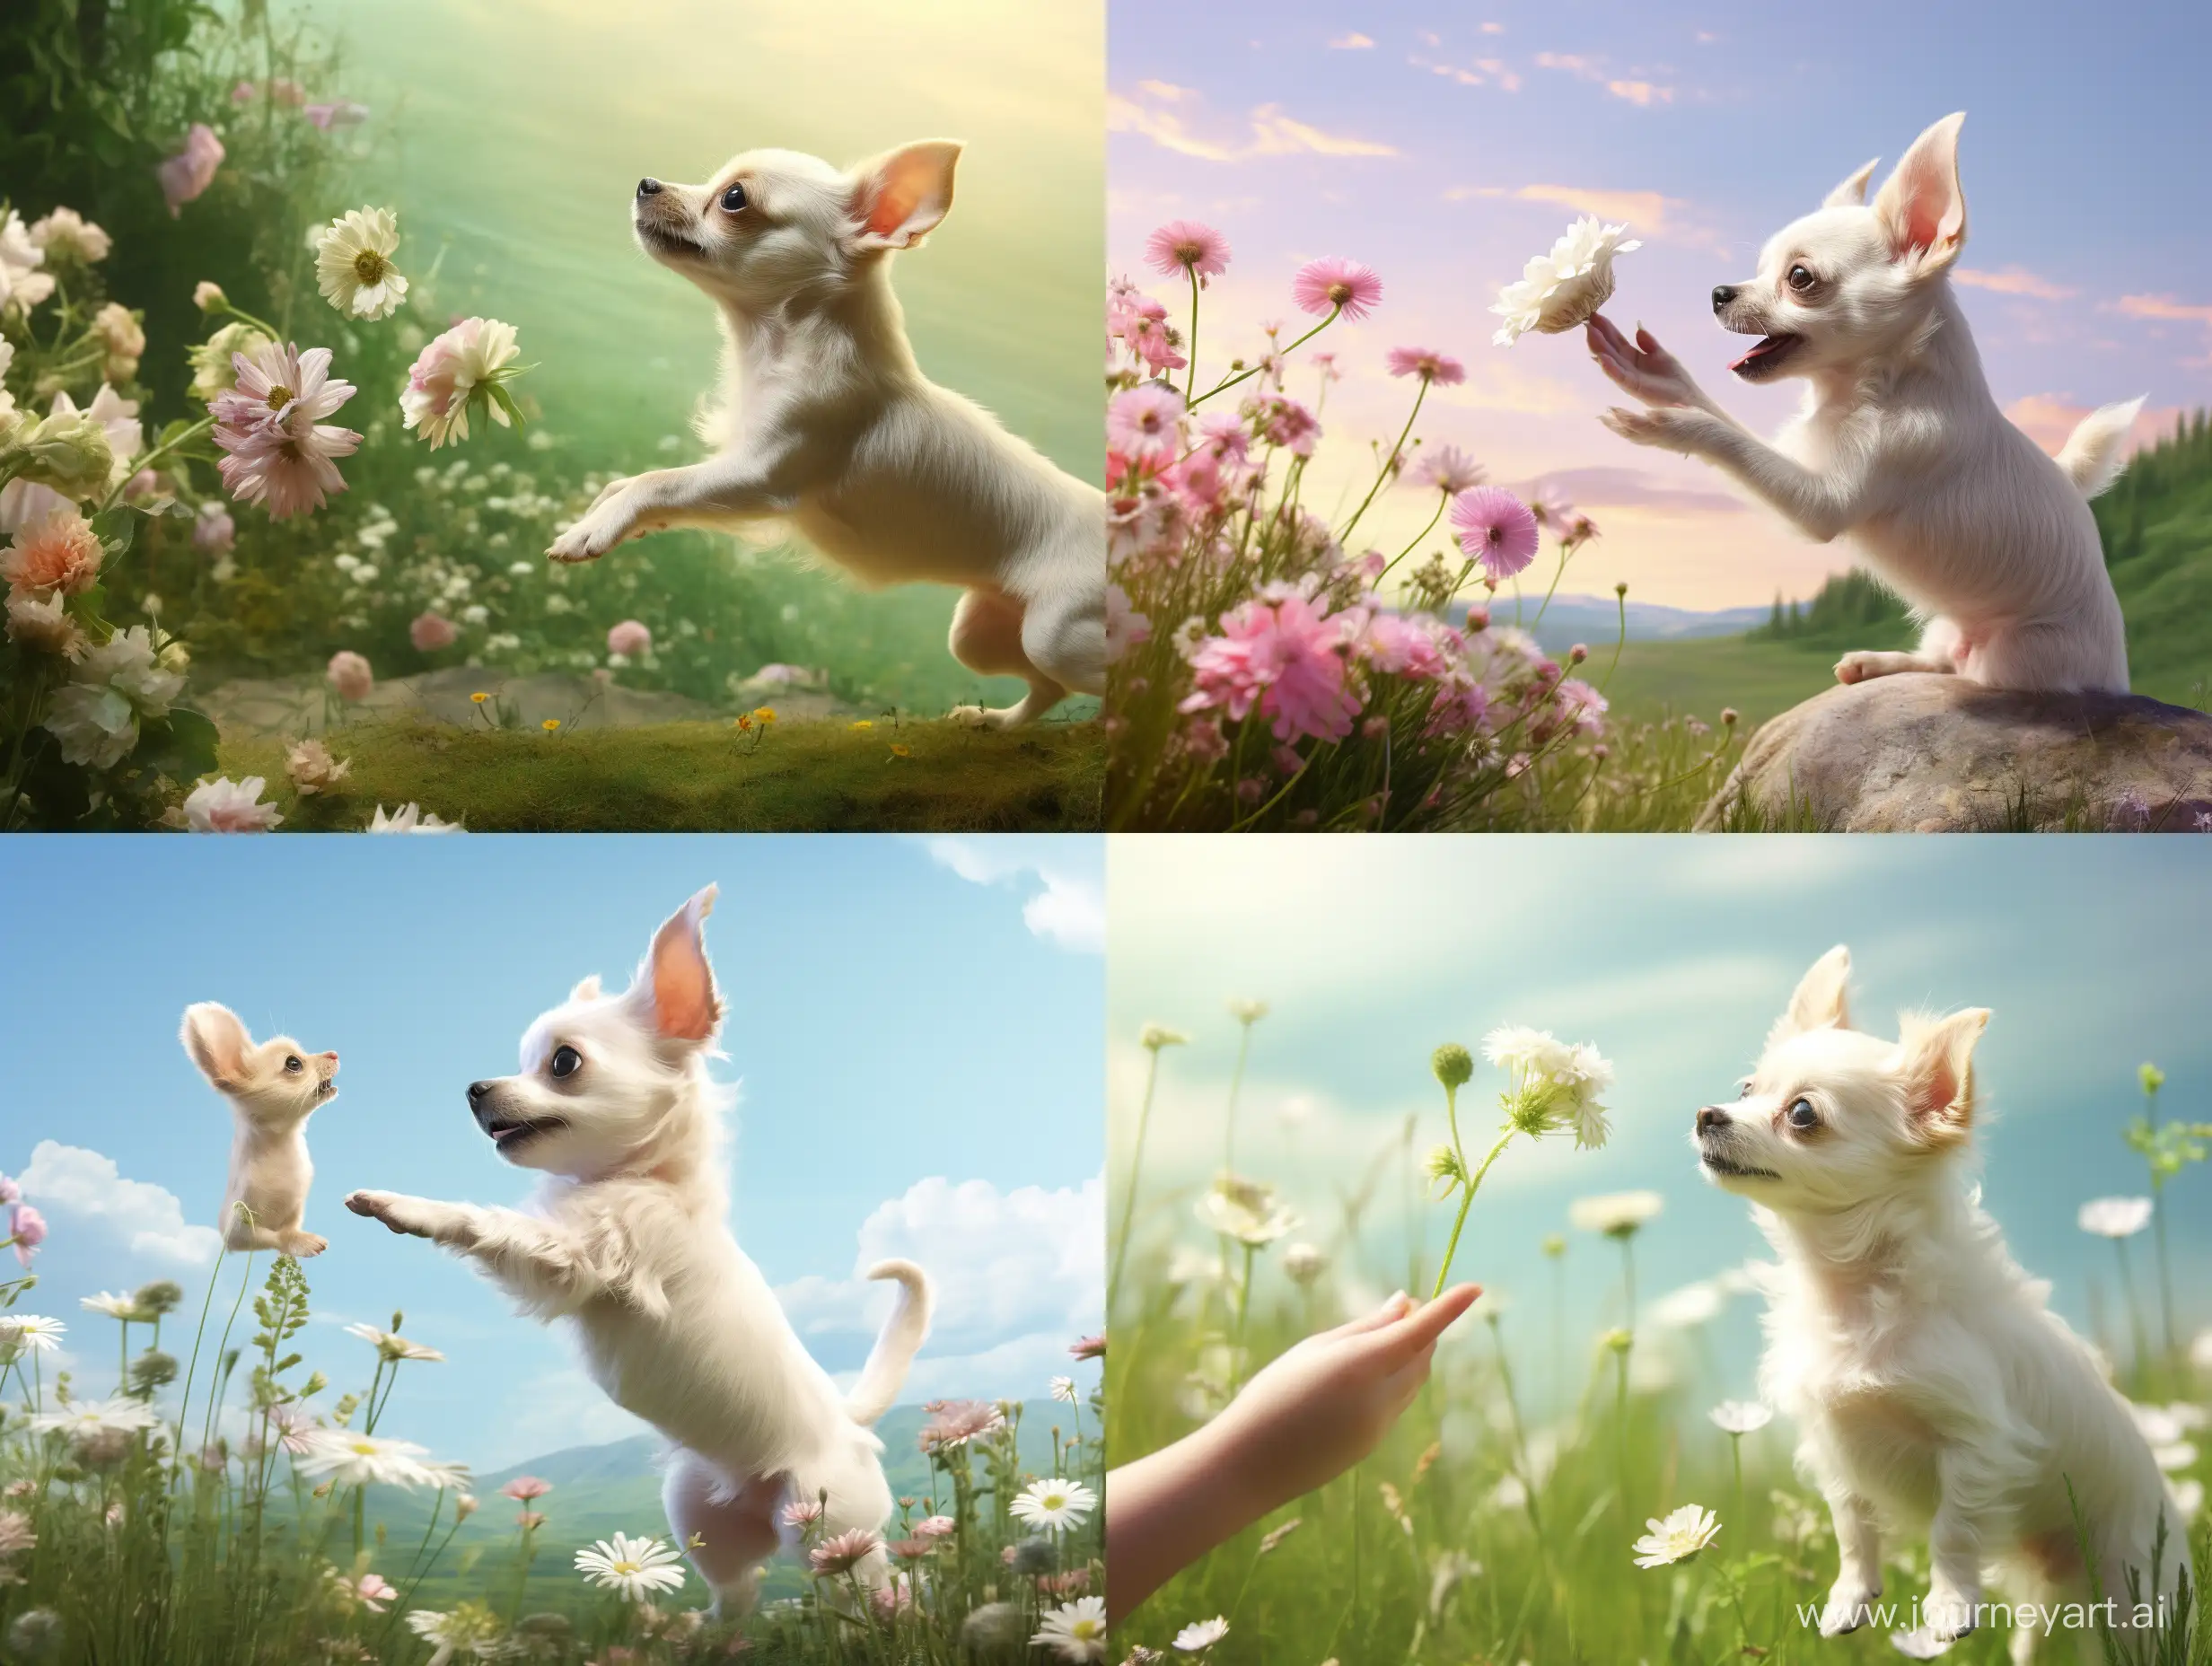 A short hair white chihuahua jumping into air trying to grab a bone from small girls hand. Summer, flowers and green grass on a background.